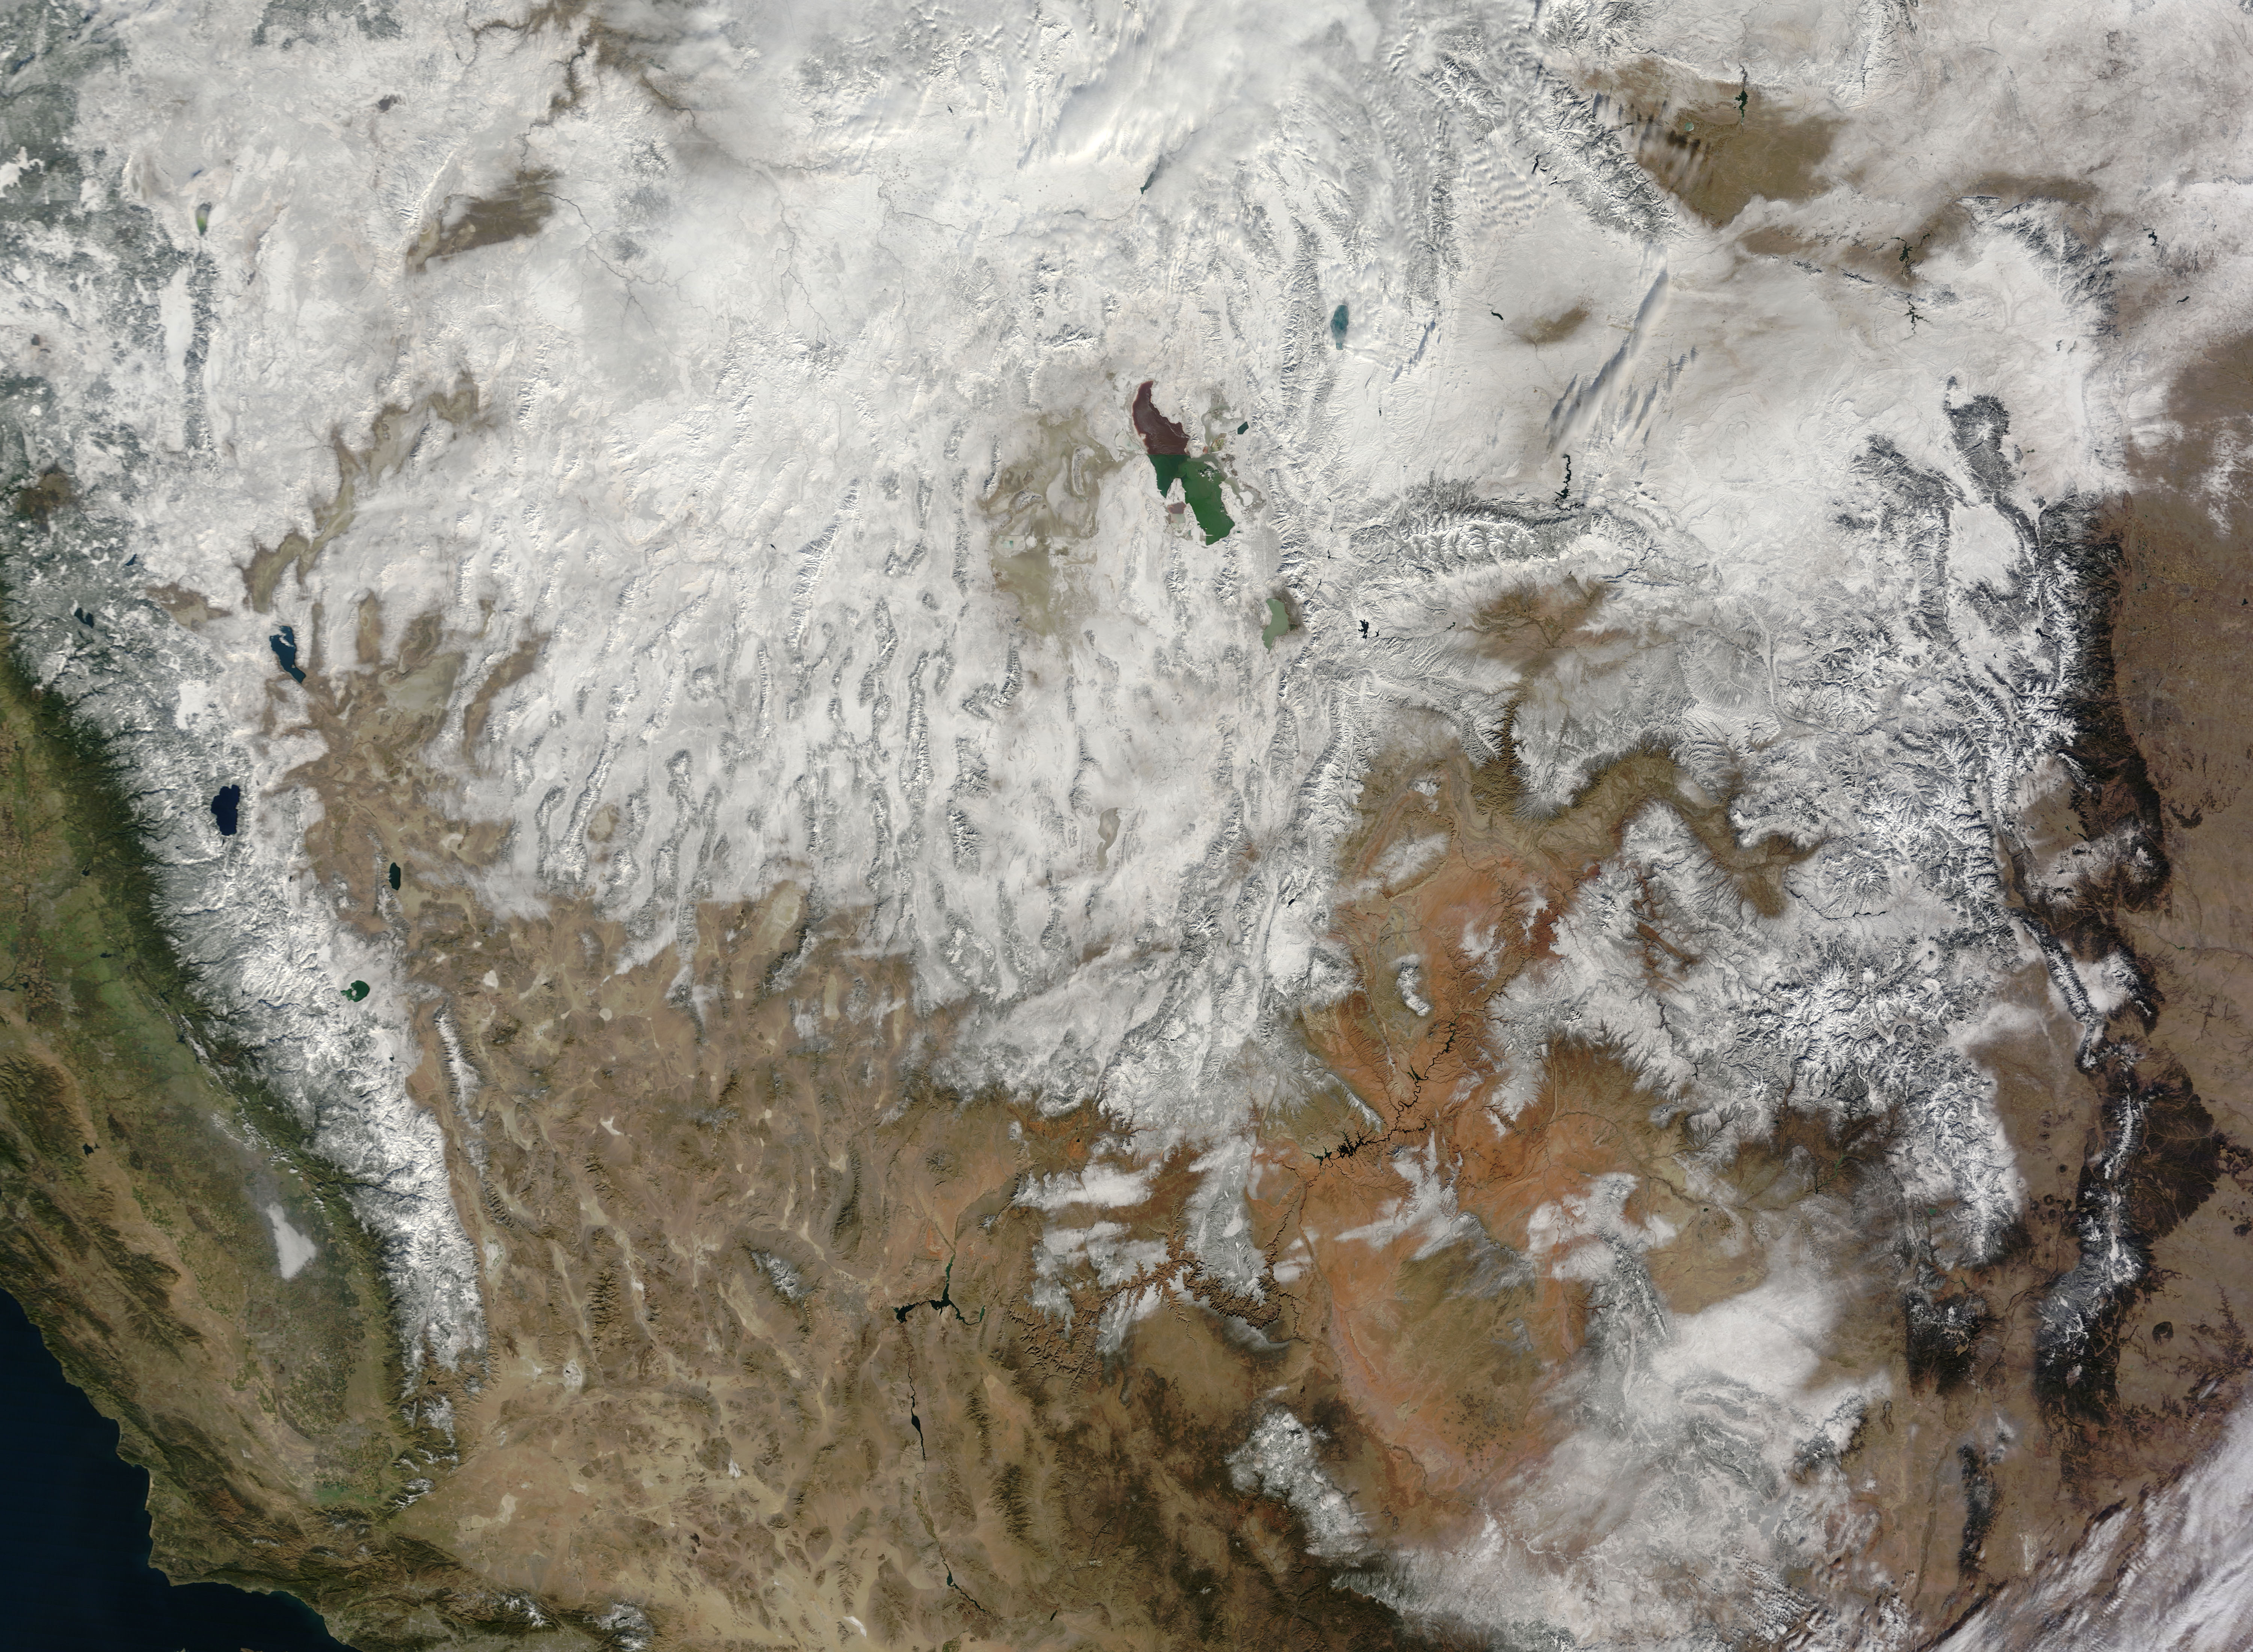 Snowstorm covers Western United States - related image preview